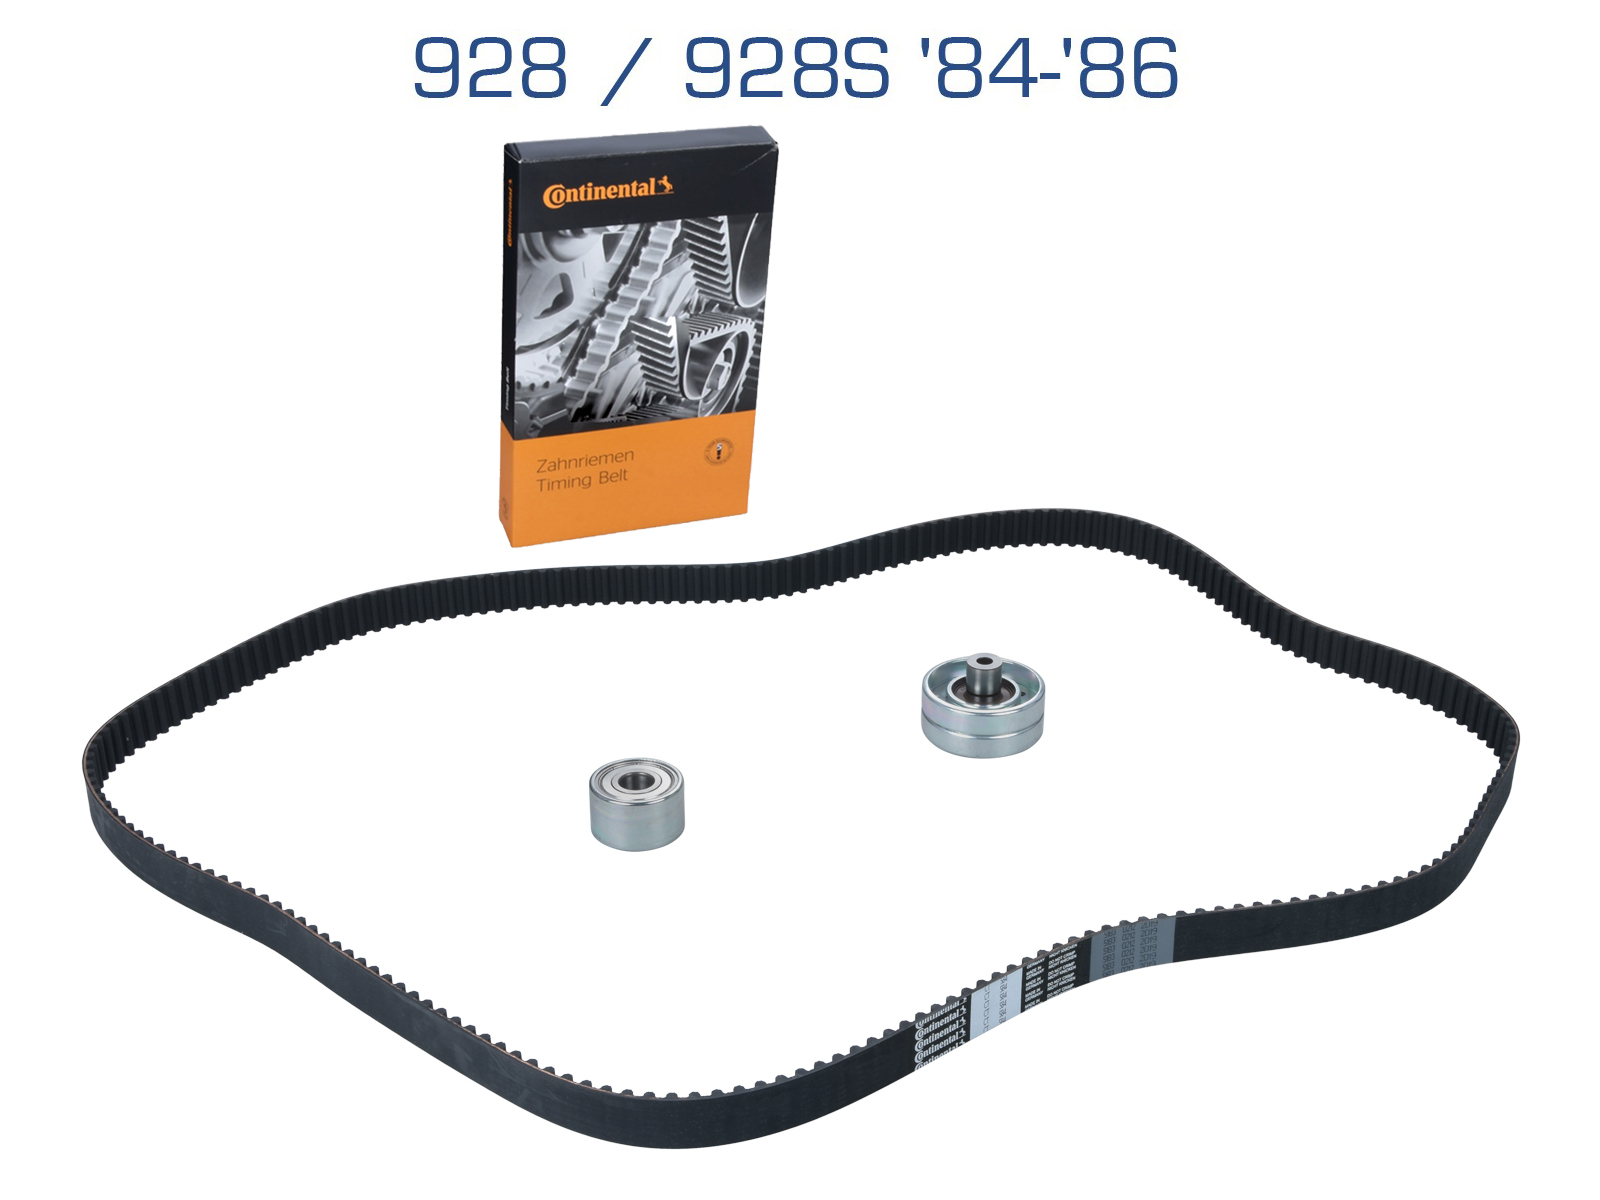 Timing Belt Kit for 3-Series/5-Series 07-10 With Drive Belt Timing Belt Idler Pulley Timing Belt Tensioner and Valve Cover Gasket 